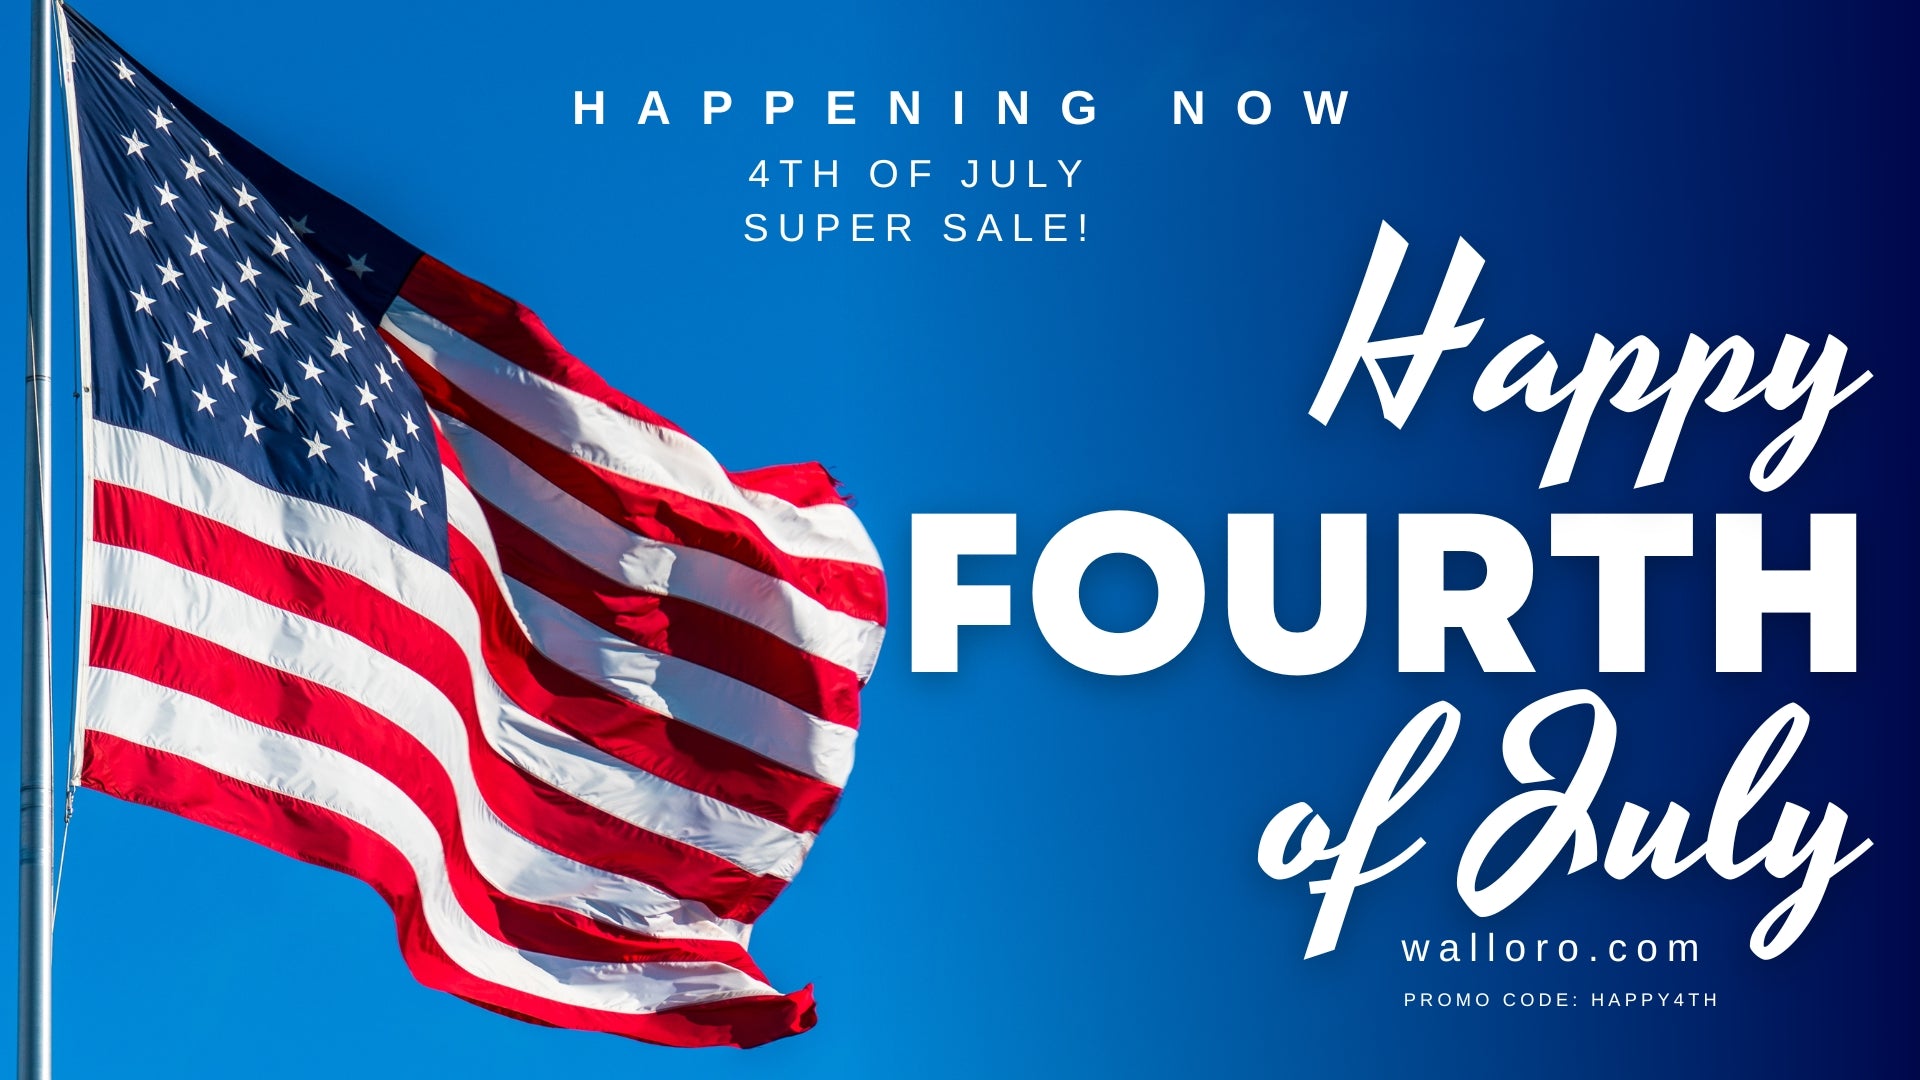 Don't miss out on the incredible 4th of July deals at Walloro Wallcoverings and More: Save 15% now!